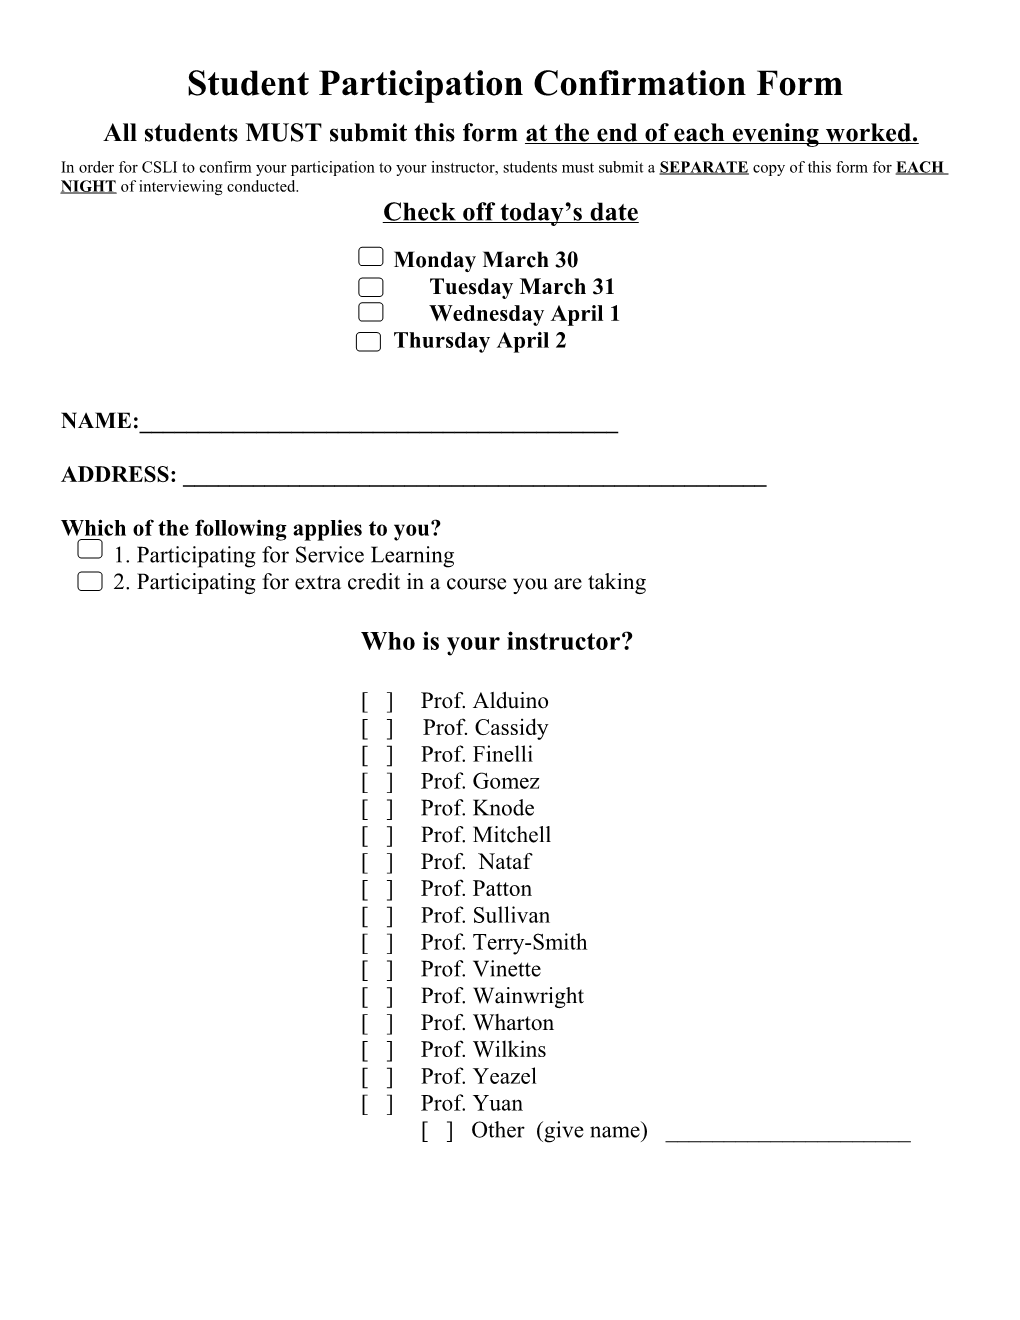 All Interviewers Must Complete This Form